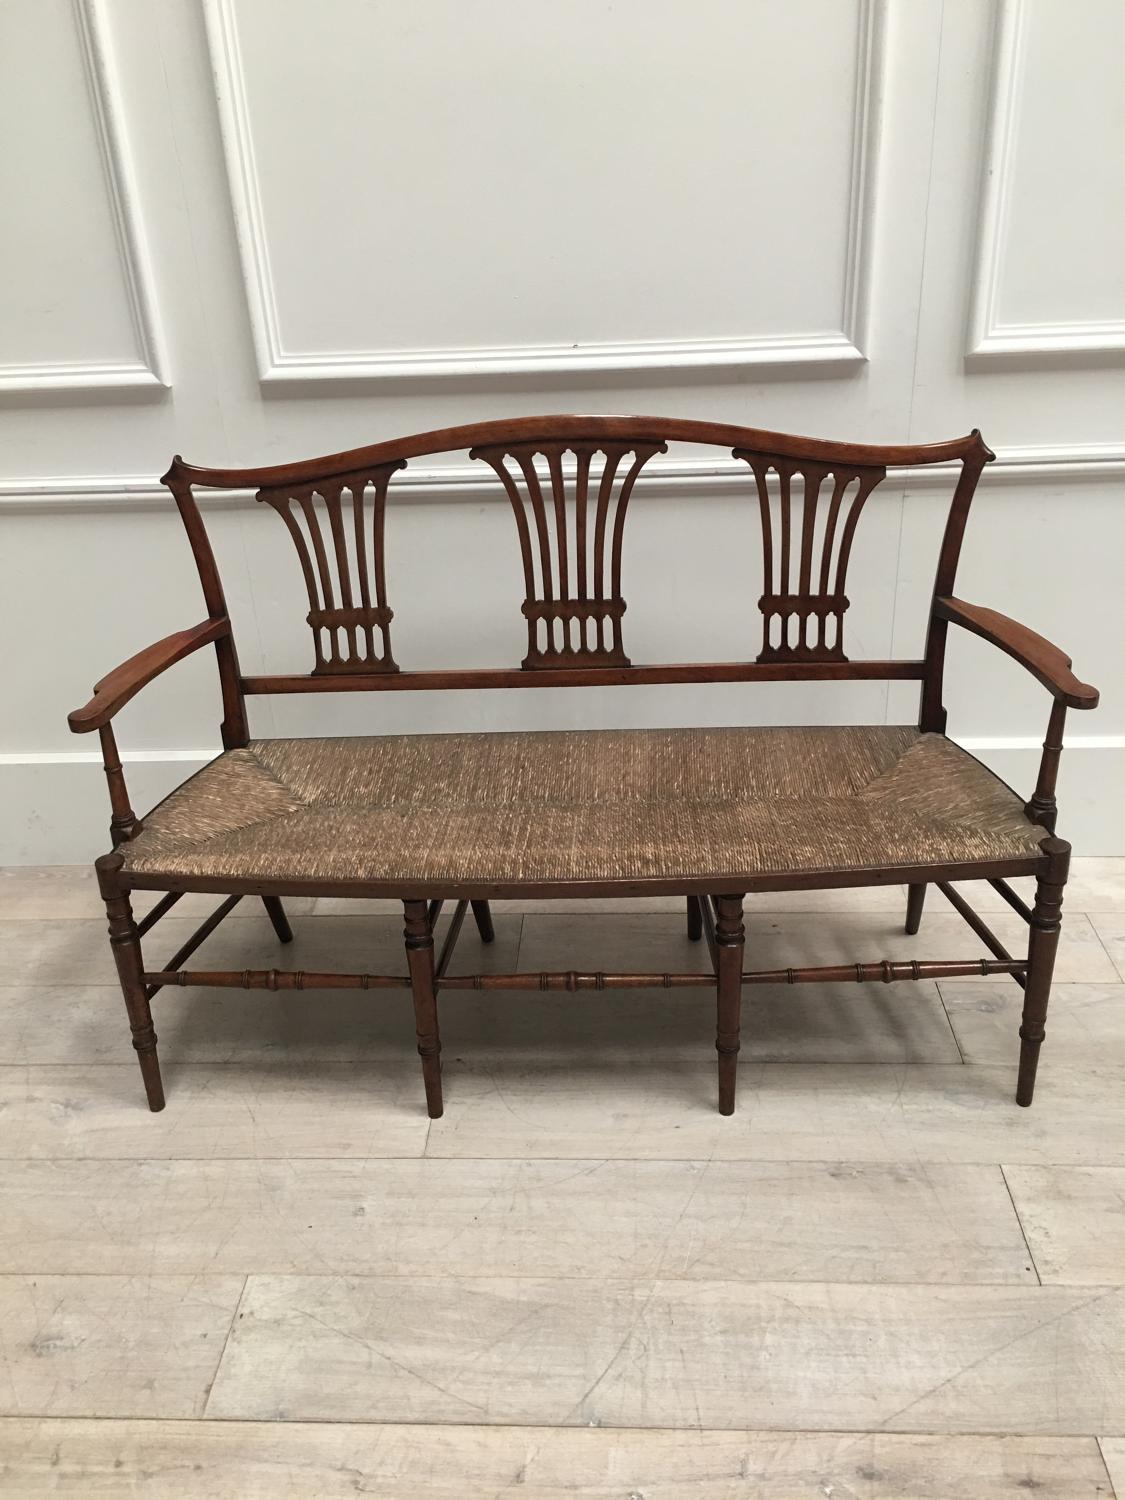 A 19thC Fruitwood settee bench